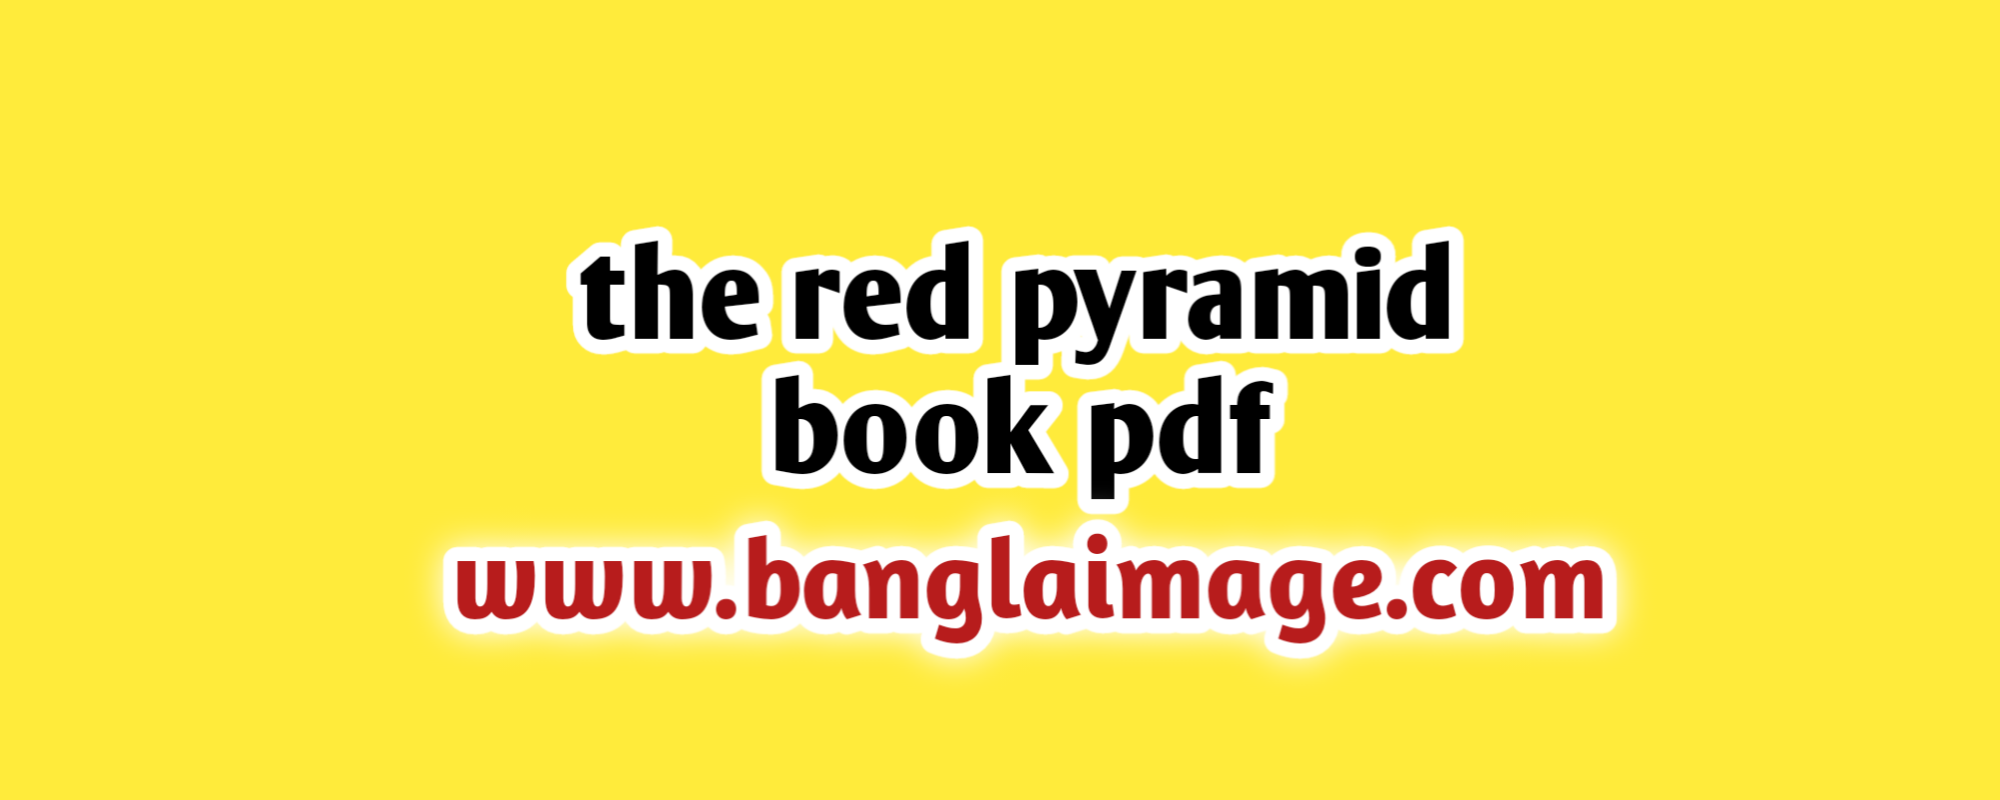 the red pyramid book pdf, the red pyramid pdf, the red pyramid, the red pyramid book